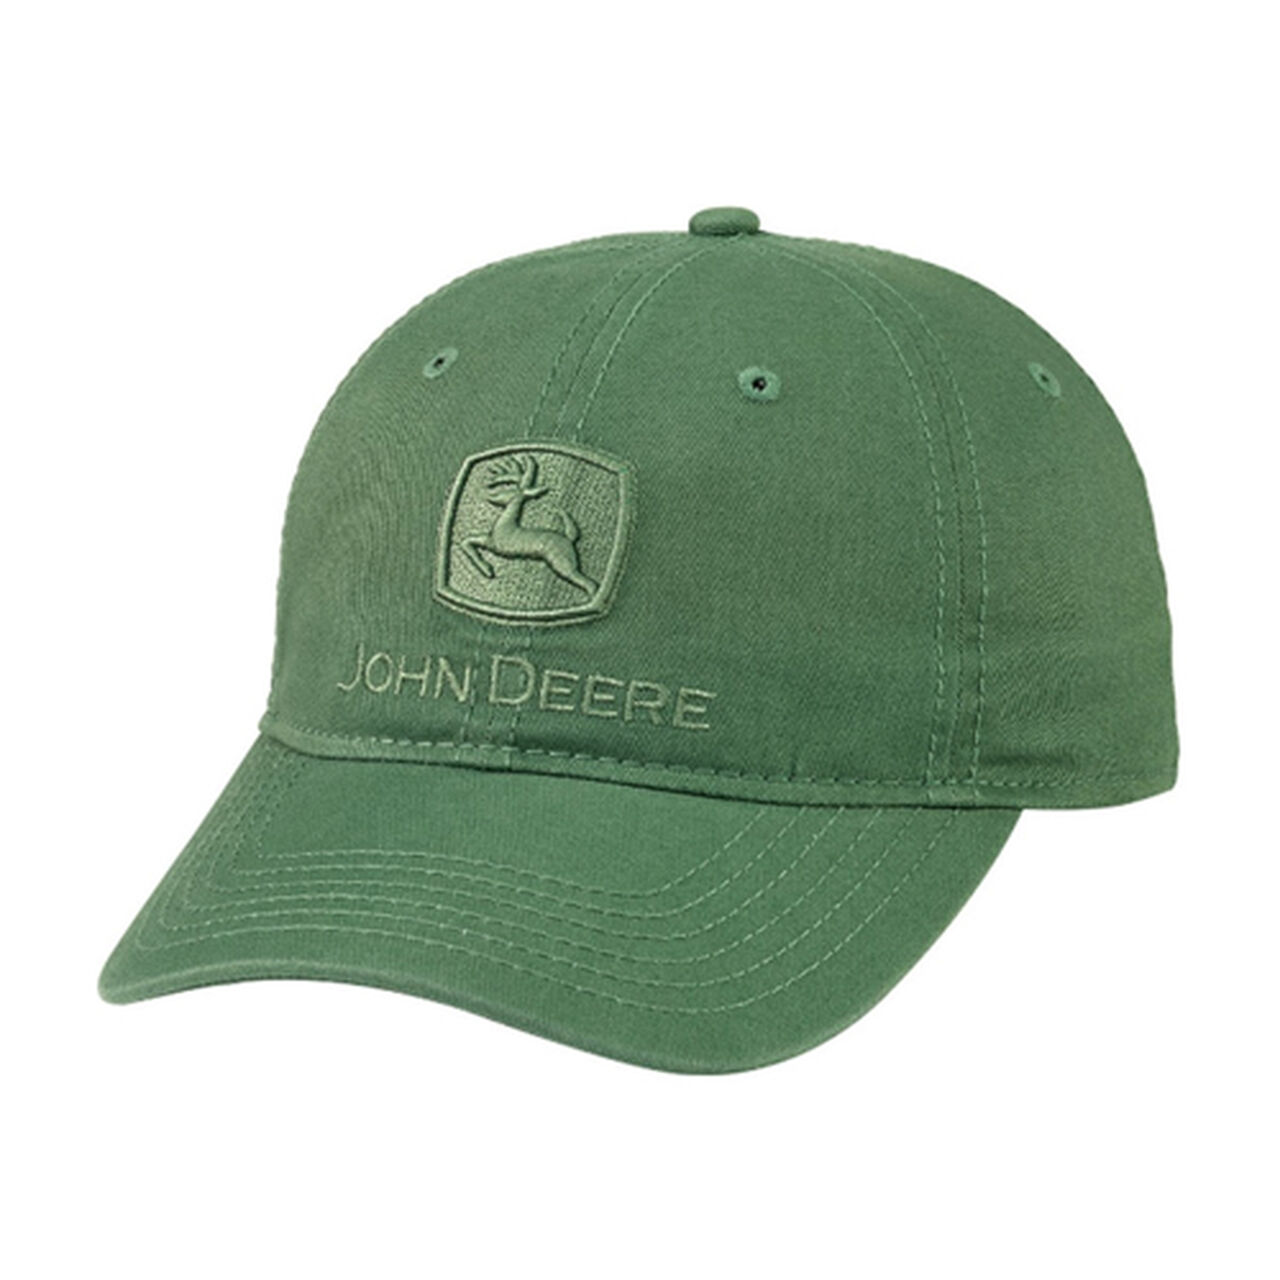 Green Garment Washed Unstructured Cap - LP83148,  image number 0